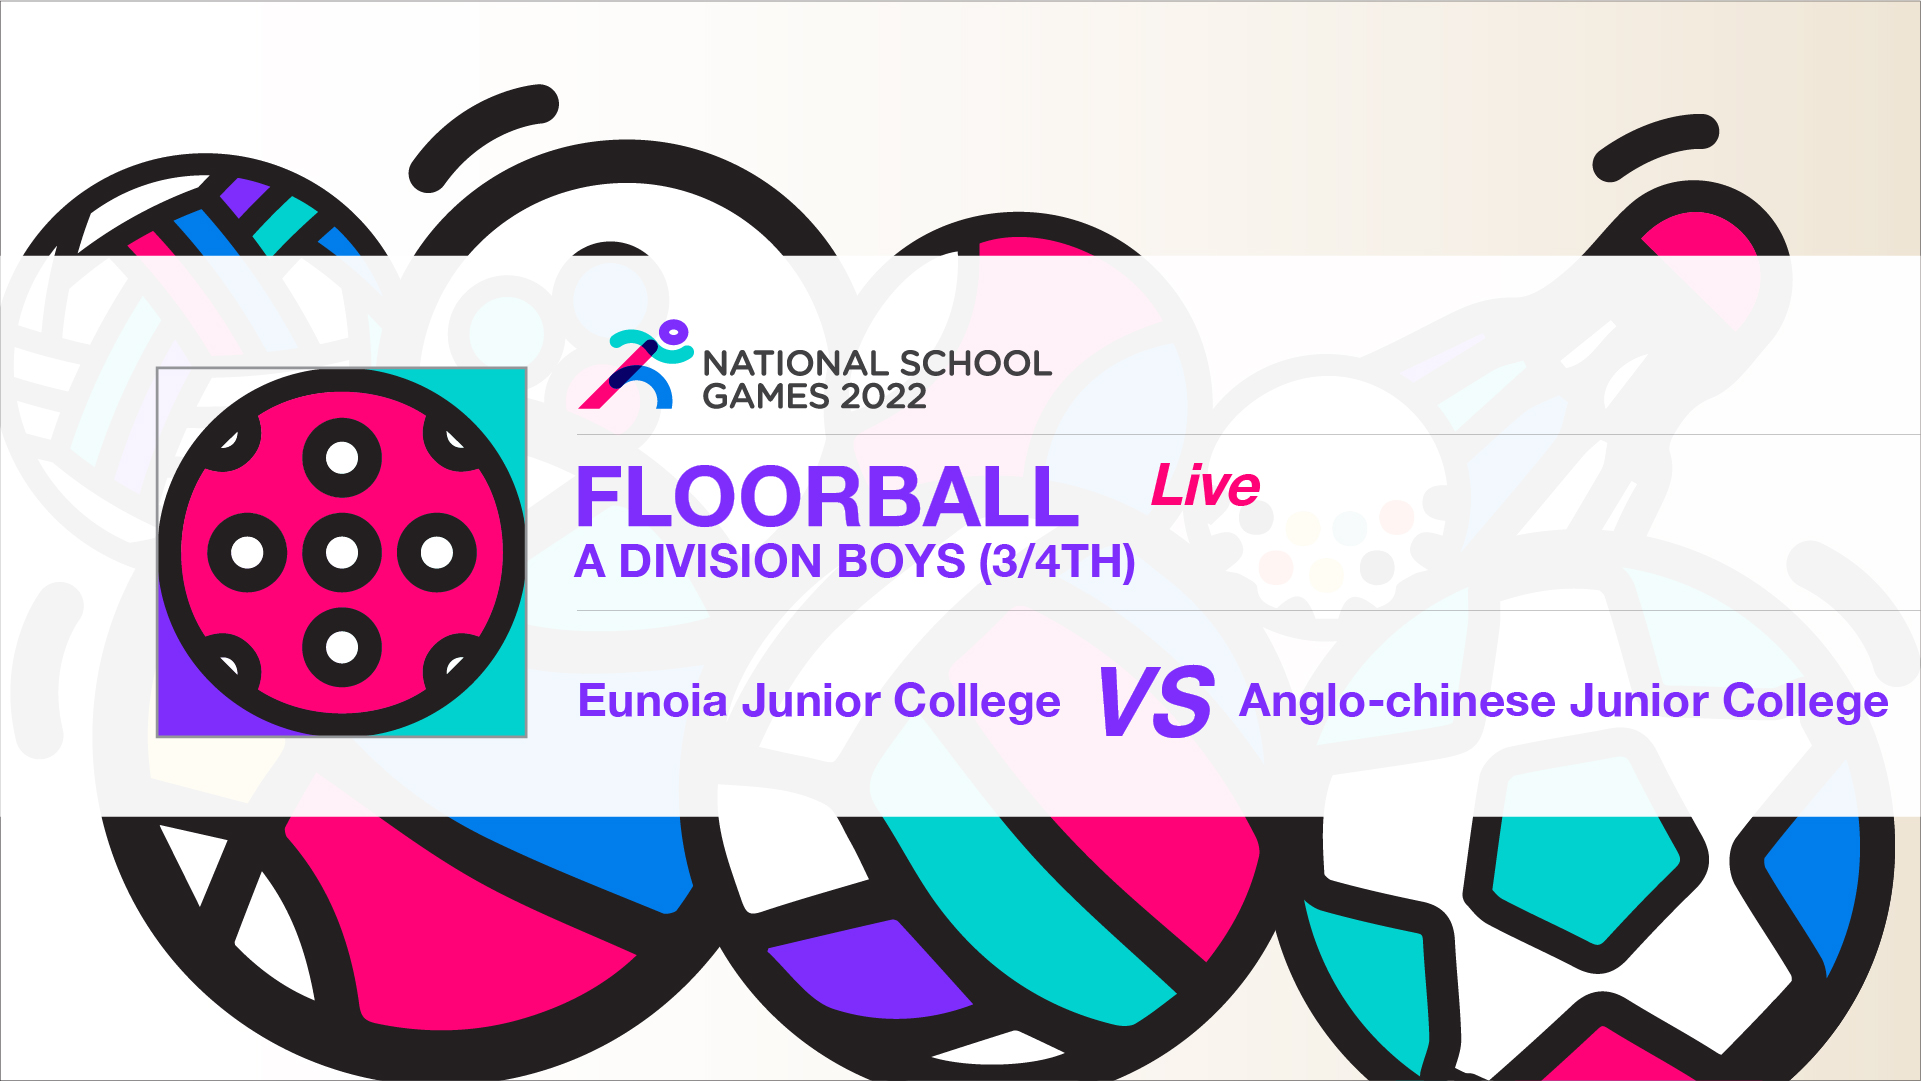 SSSC Floorball A Division Boys (3/4th) | Eunoia Junior College vs Anglo-Chinese Junior College